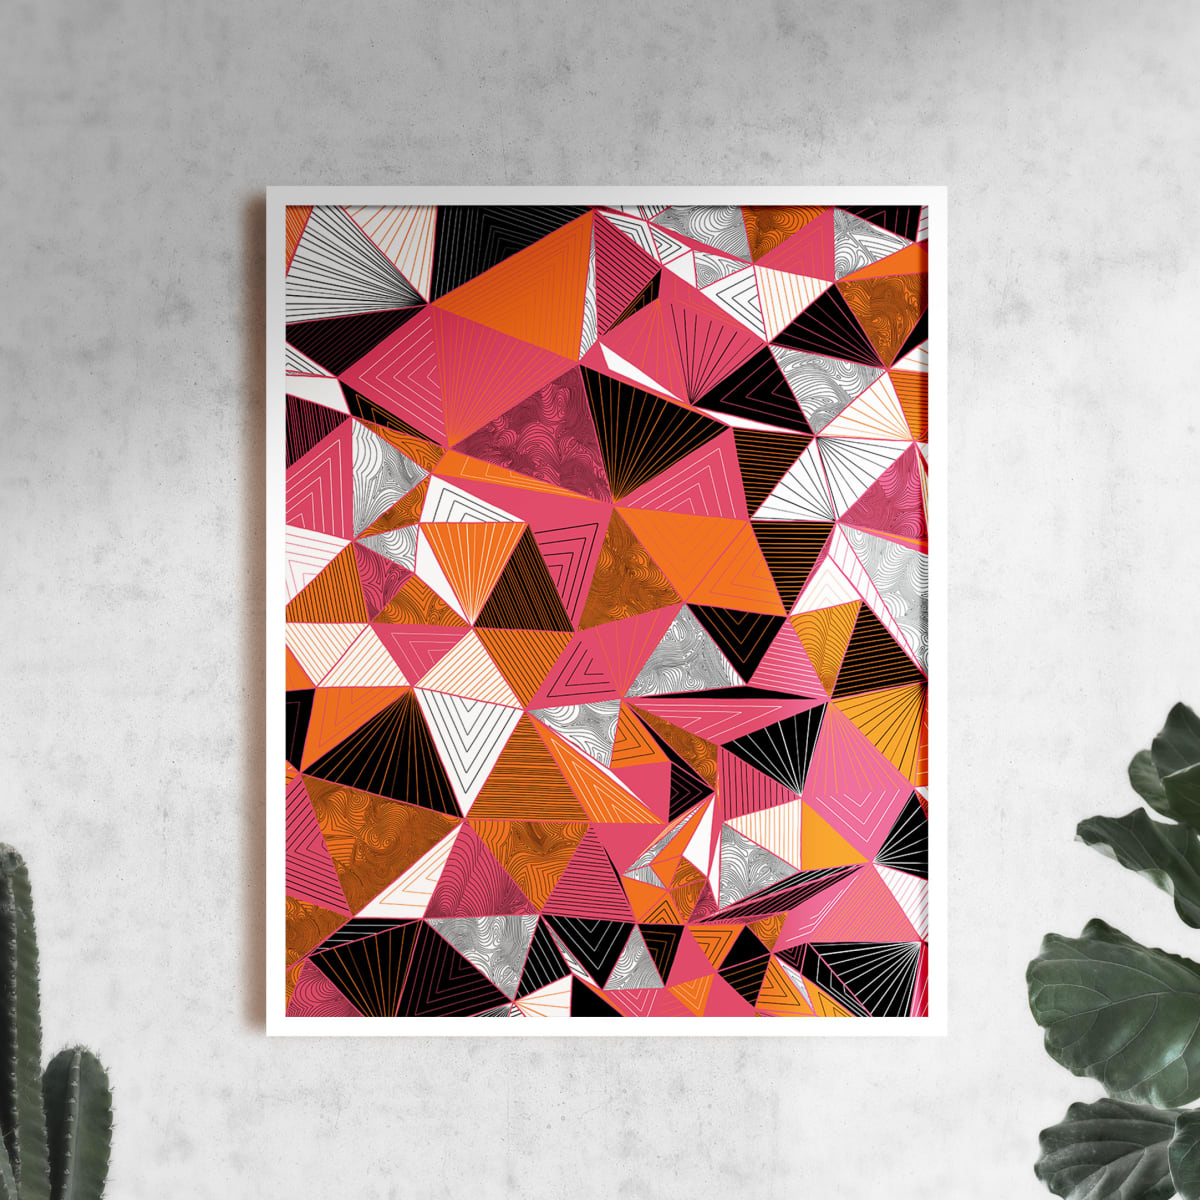 "Conscious Growth 079" Large One-of-a-Kind Print by Debbie Clapper  Image: Conscious Growth Print 079, a pink, orange, black and white one of a kind archival modern art print